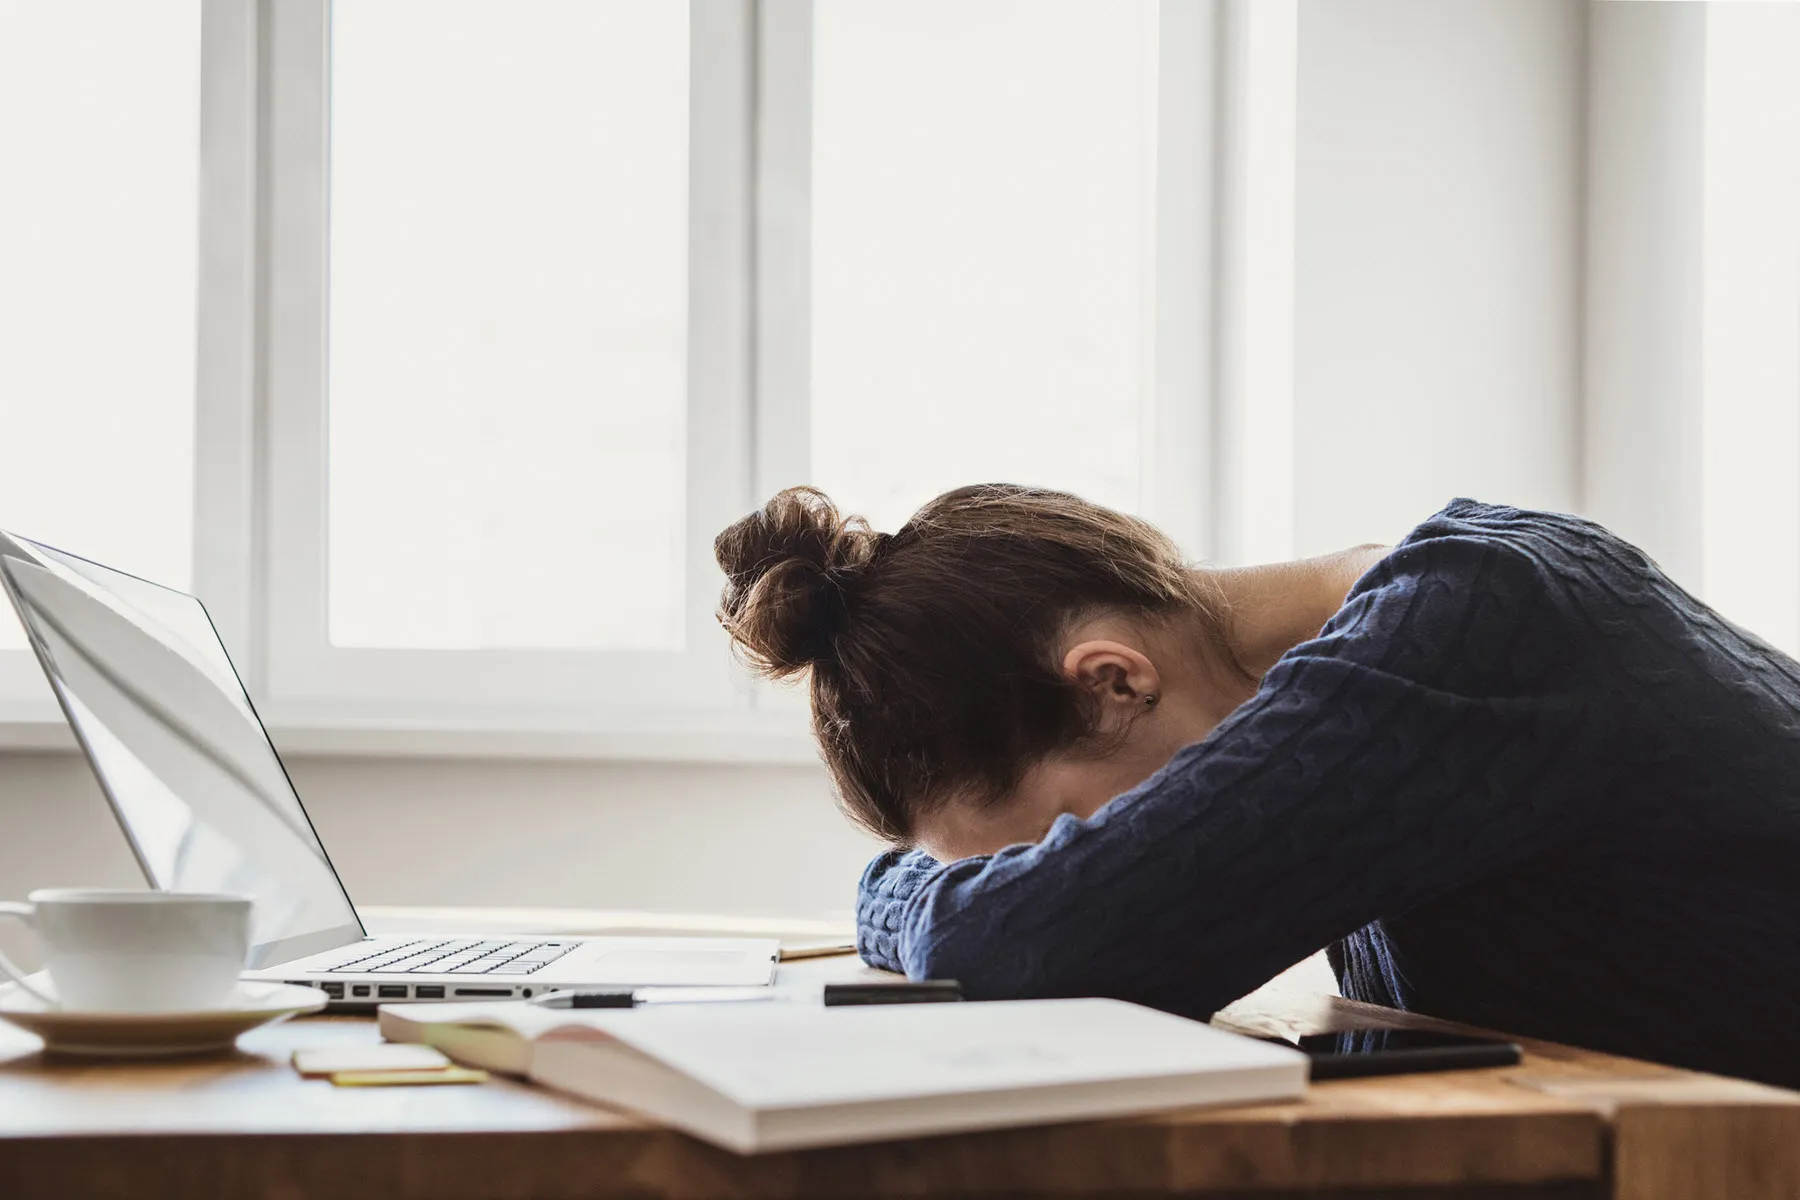 Two-Thirds of Working Parents Are Burned Out, New Study Suggests